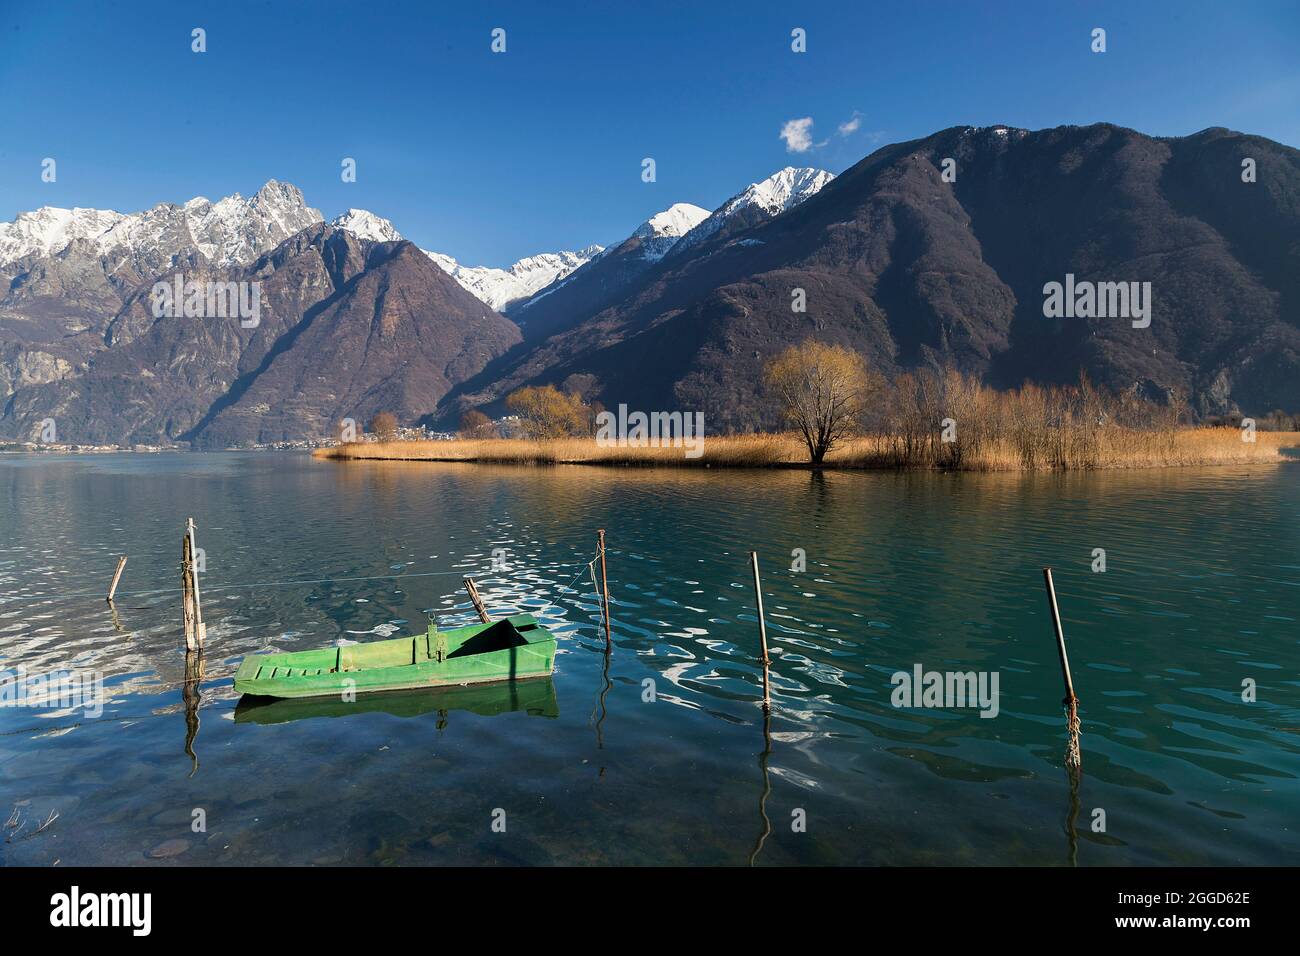 Pian di Spagna Nature Reserve, Lago di Mezzola and the wetland area which separates it from Lake Como, Lombardy, Italy, Europe Stock Photo